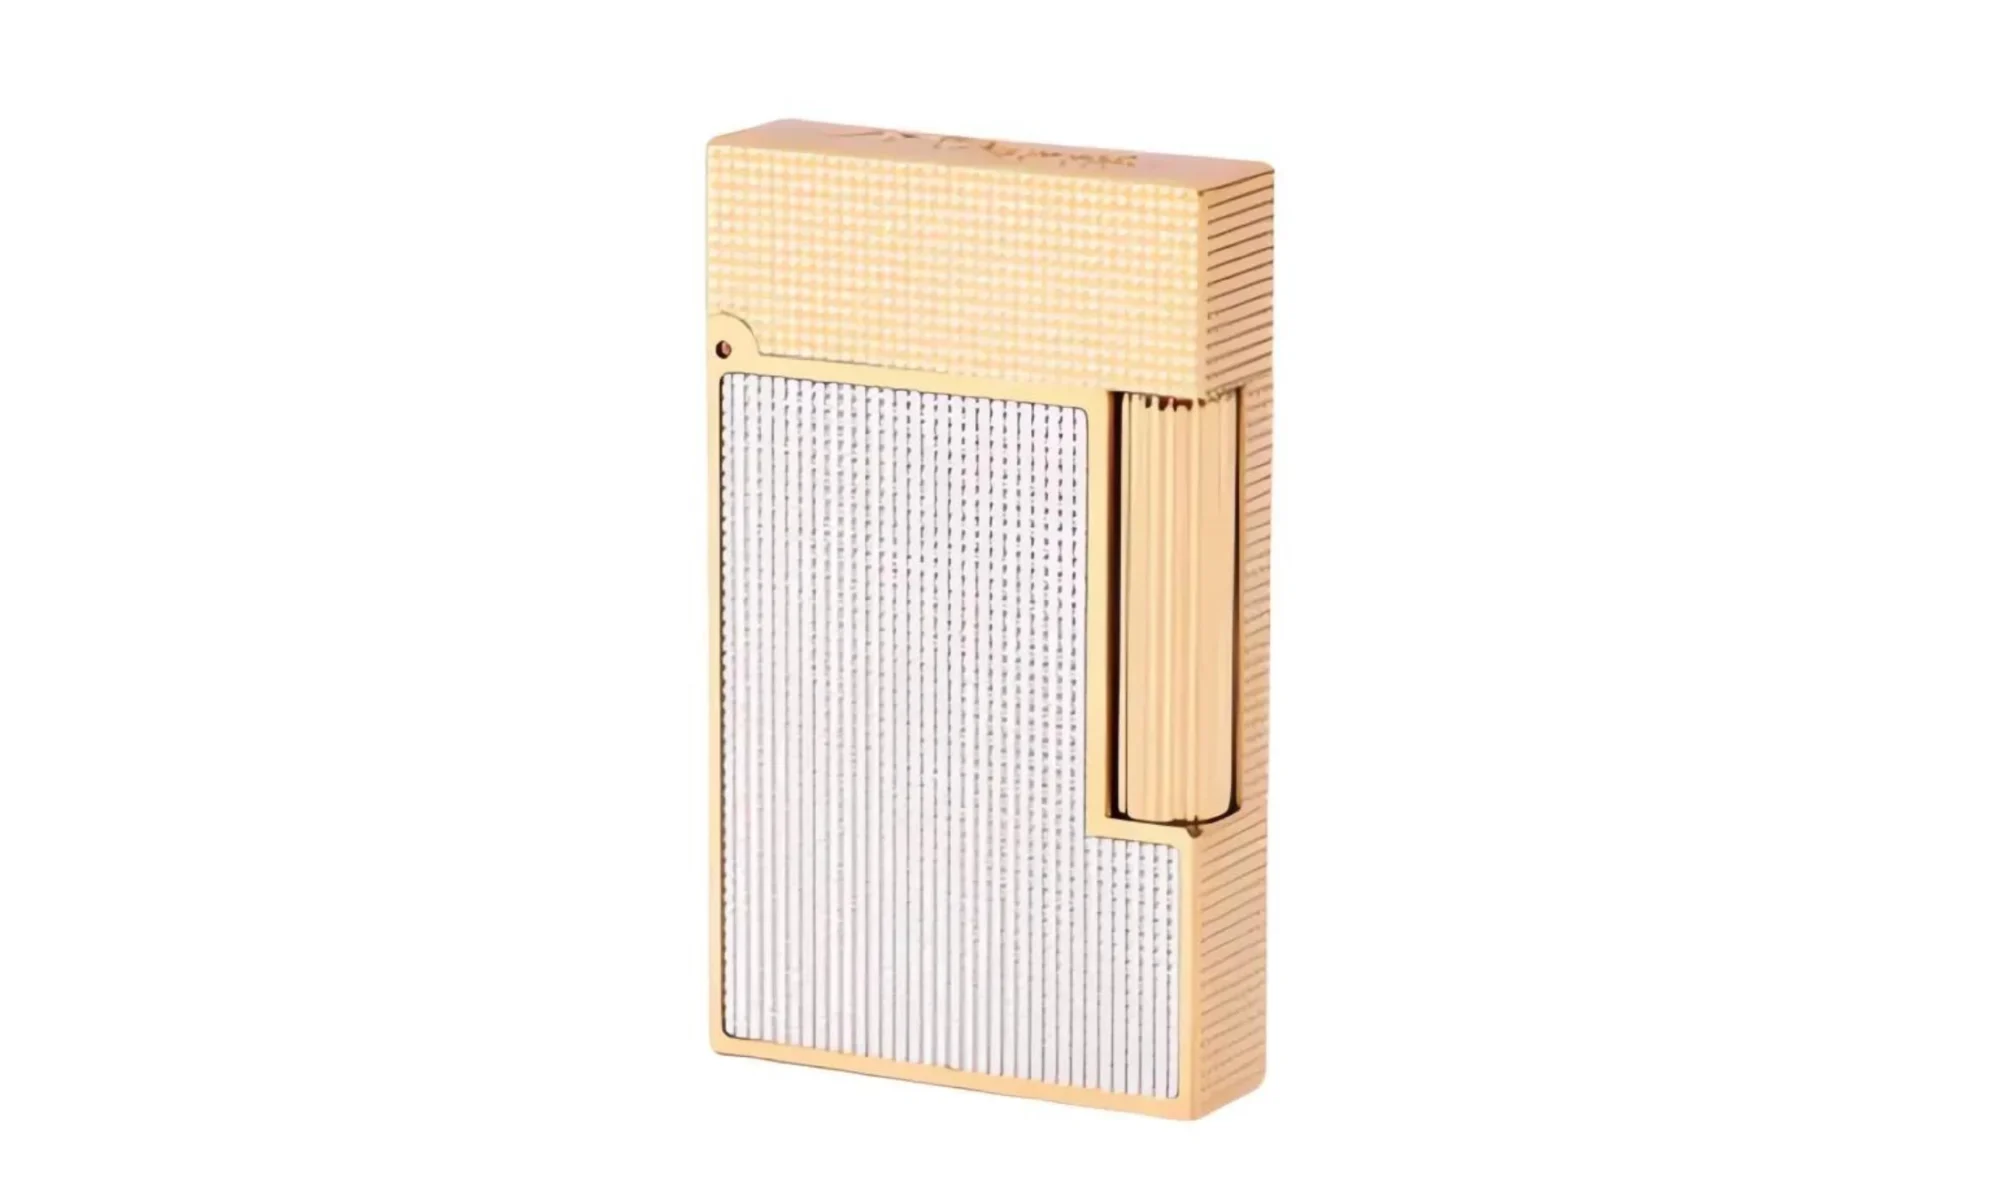 S.T. Dupont Ligne 2 Cling With Gold Finish Lighter